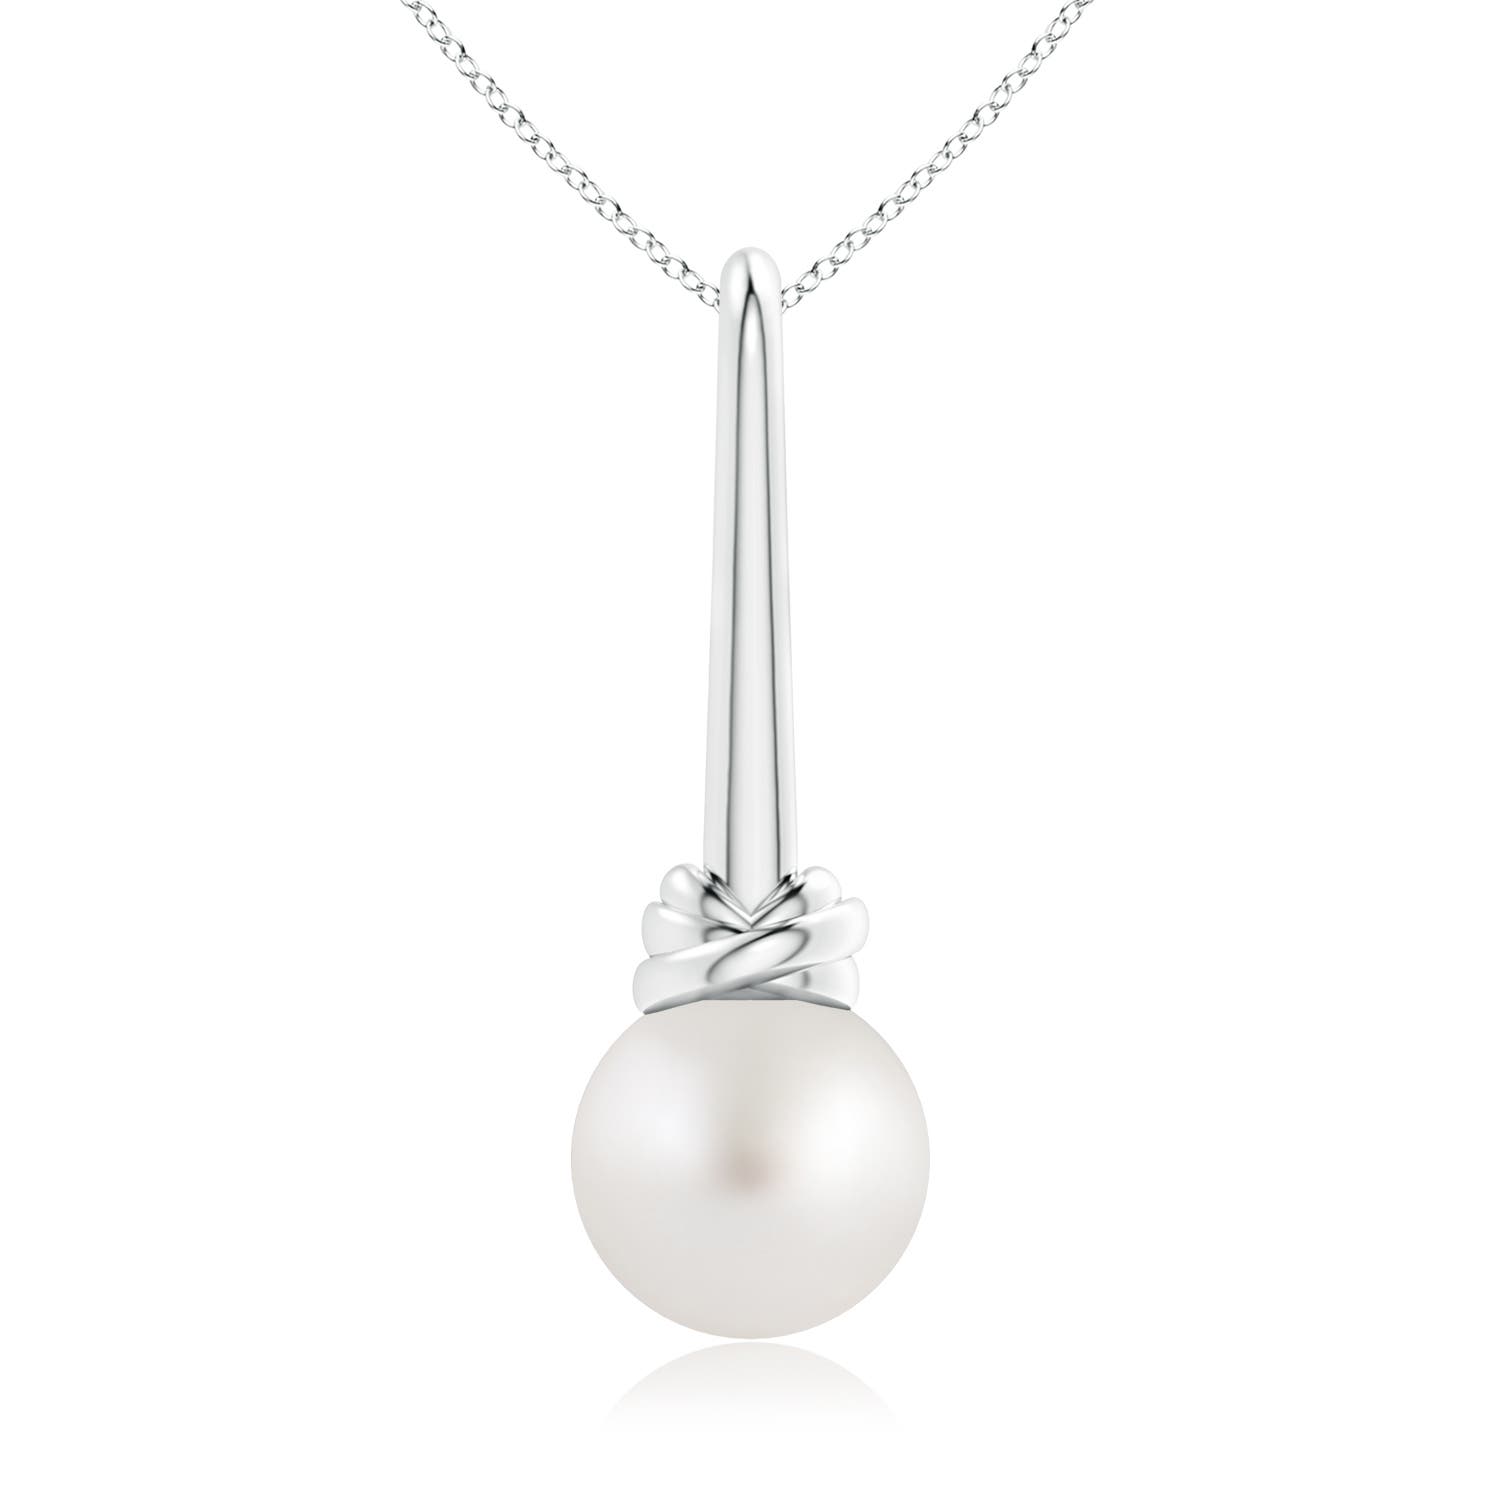 AA - South Sea Cultured Pearl / 7.2 CT / 14 KT White Gold